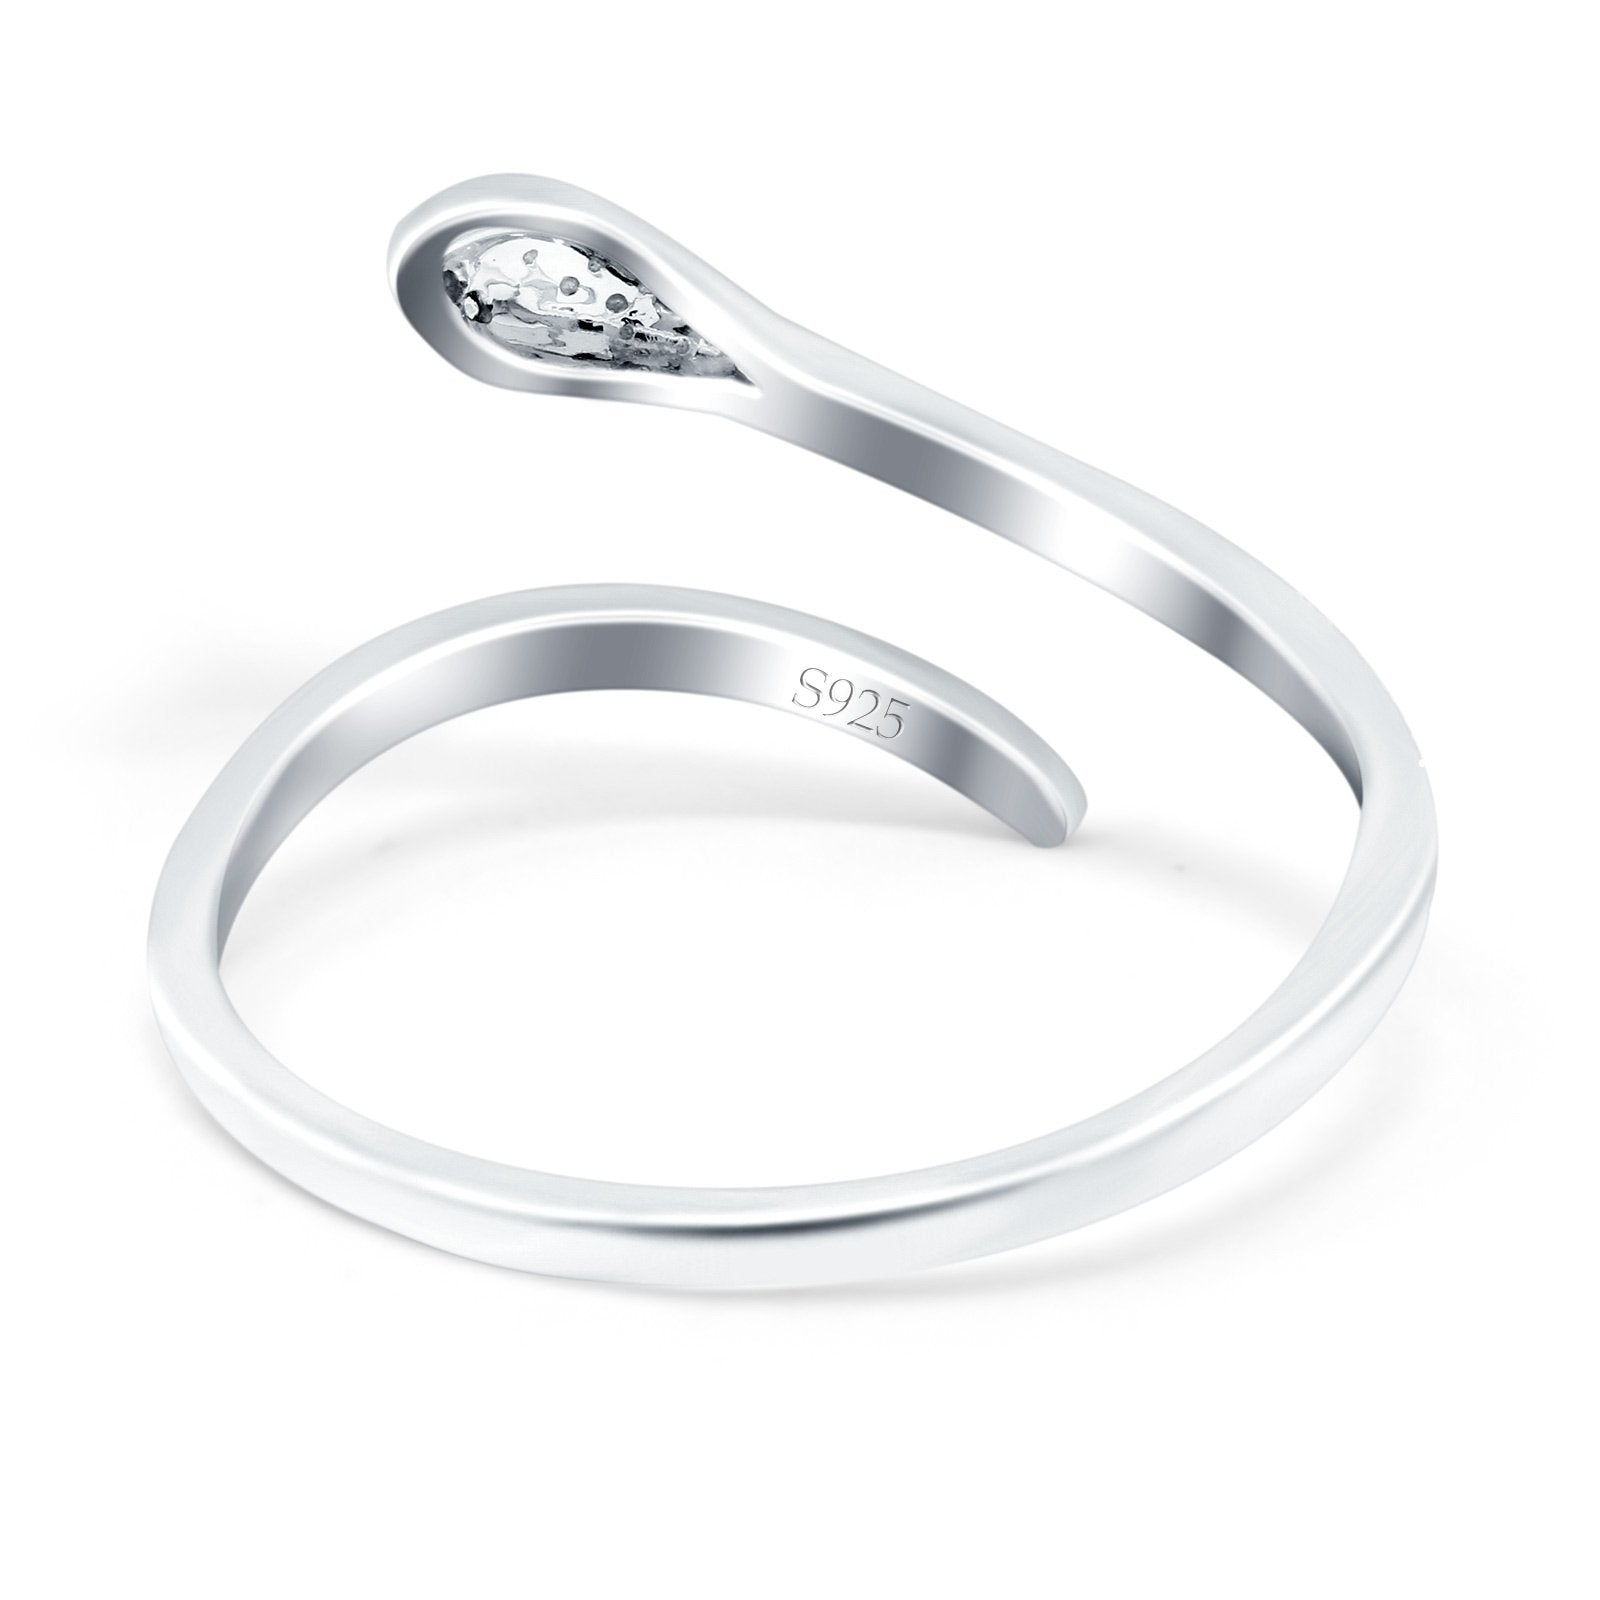 Petite Dainty Snake Ring Band Round Simulated Cubic Zirconia 925 Sterling Silver (3mm)